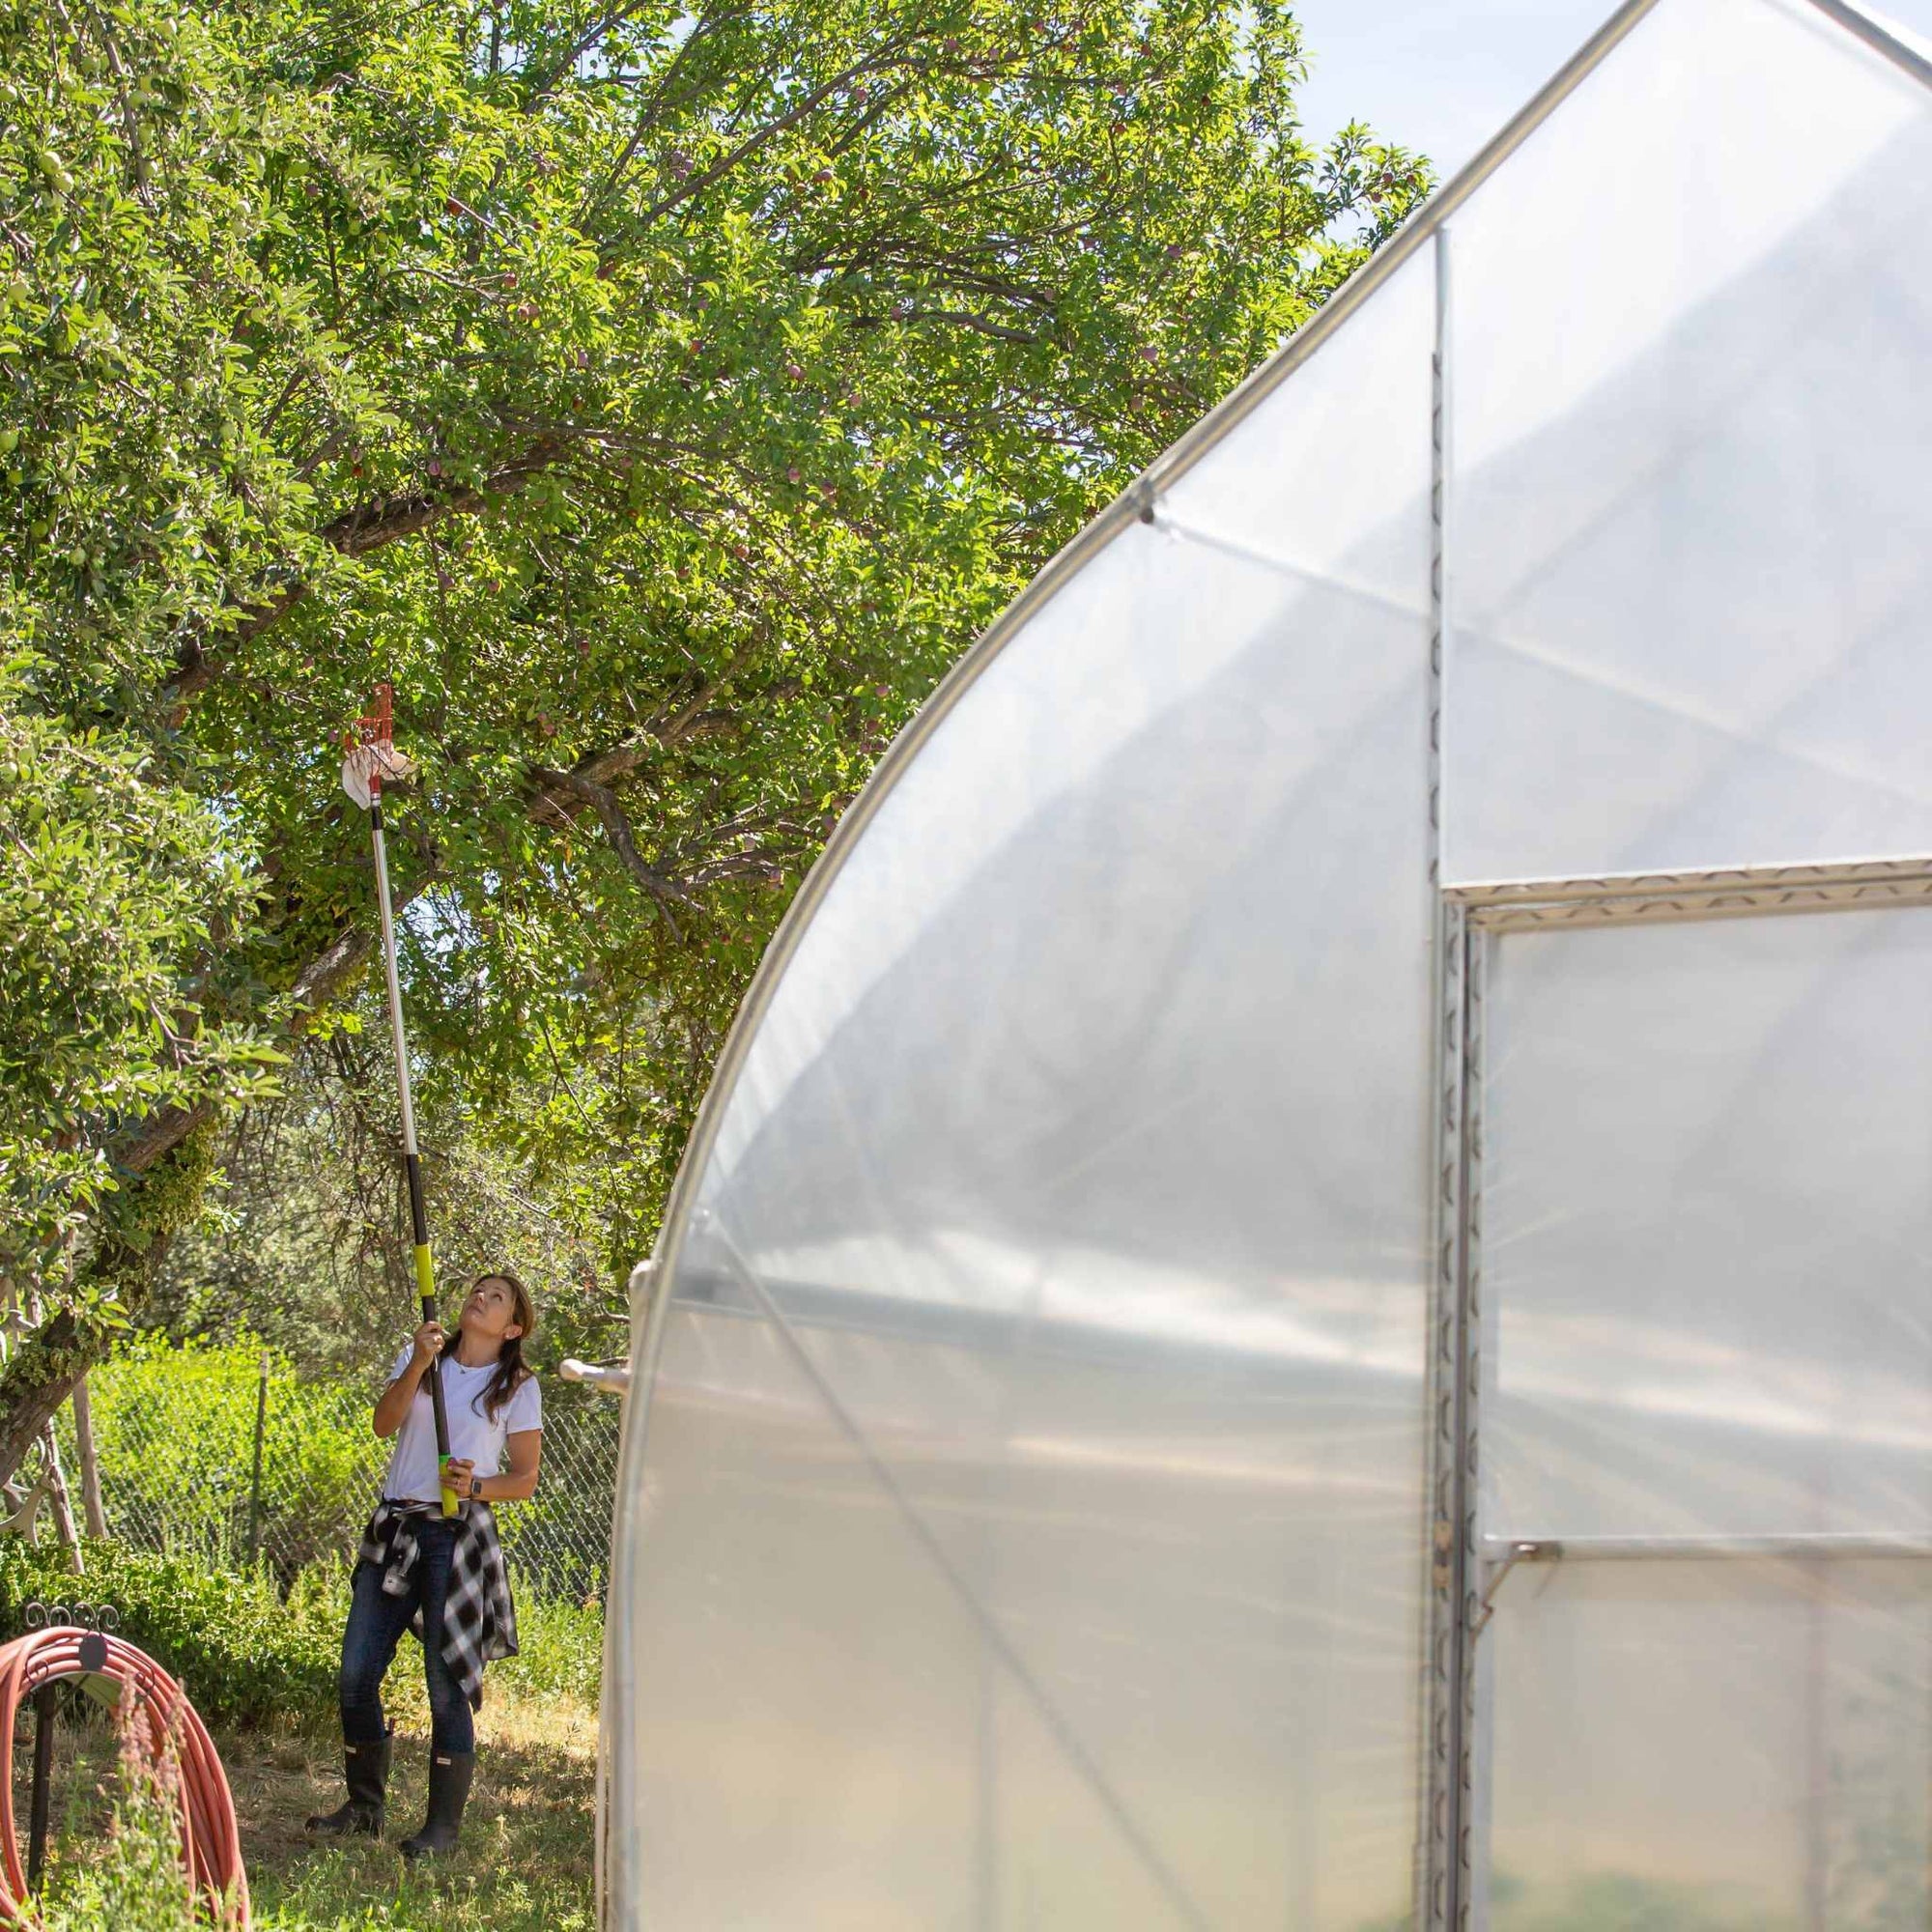 Gothic High Tunnel Hoop House in Backyard with woman picking apples